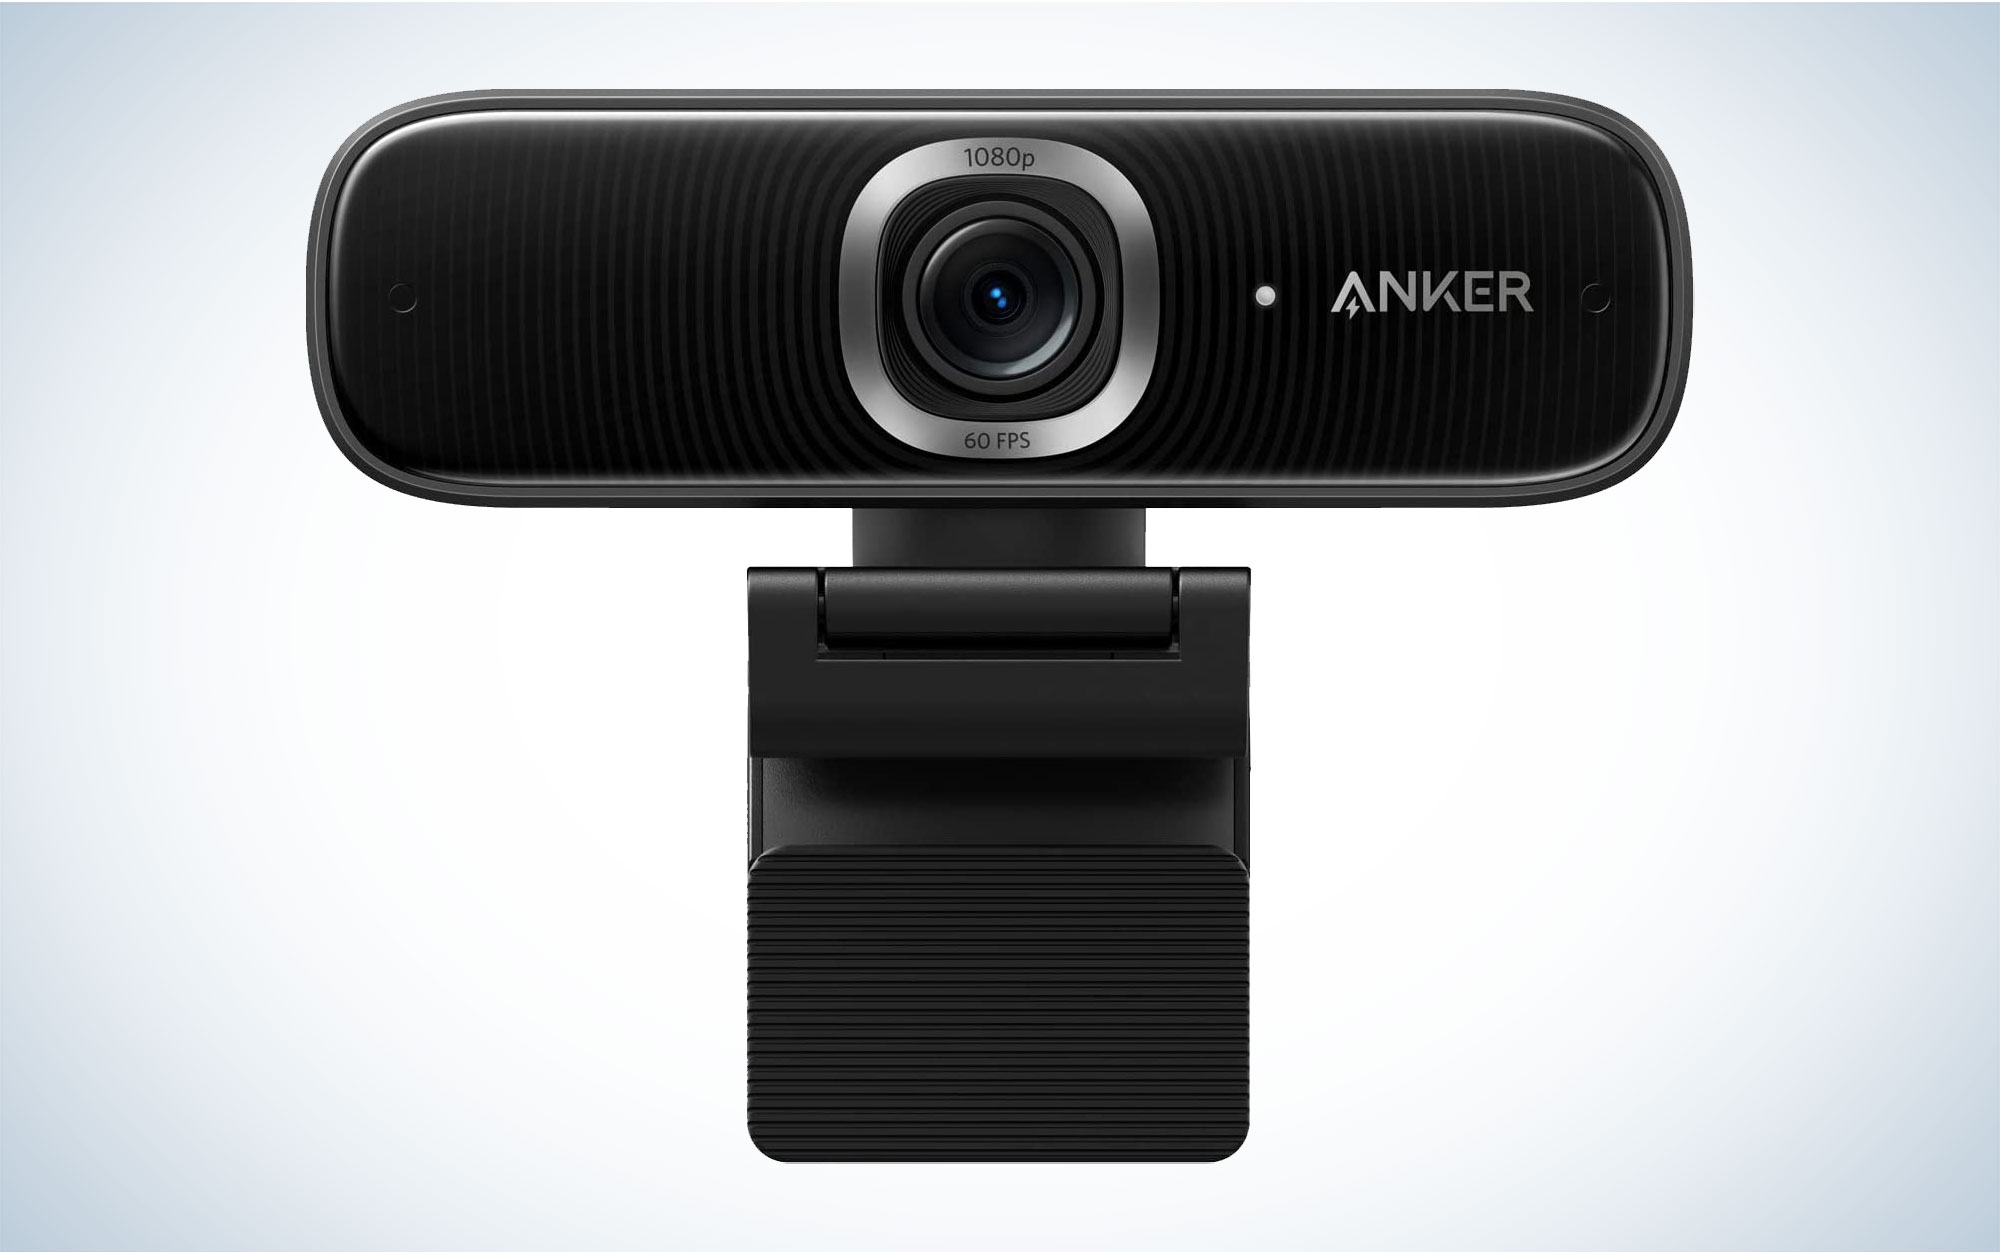 Anker PowerConf C300 is the best webcam for streaming.